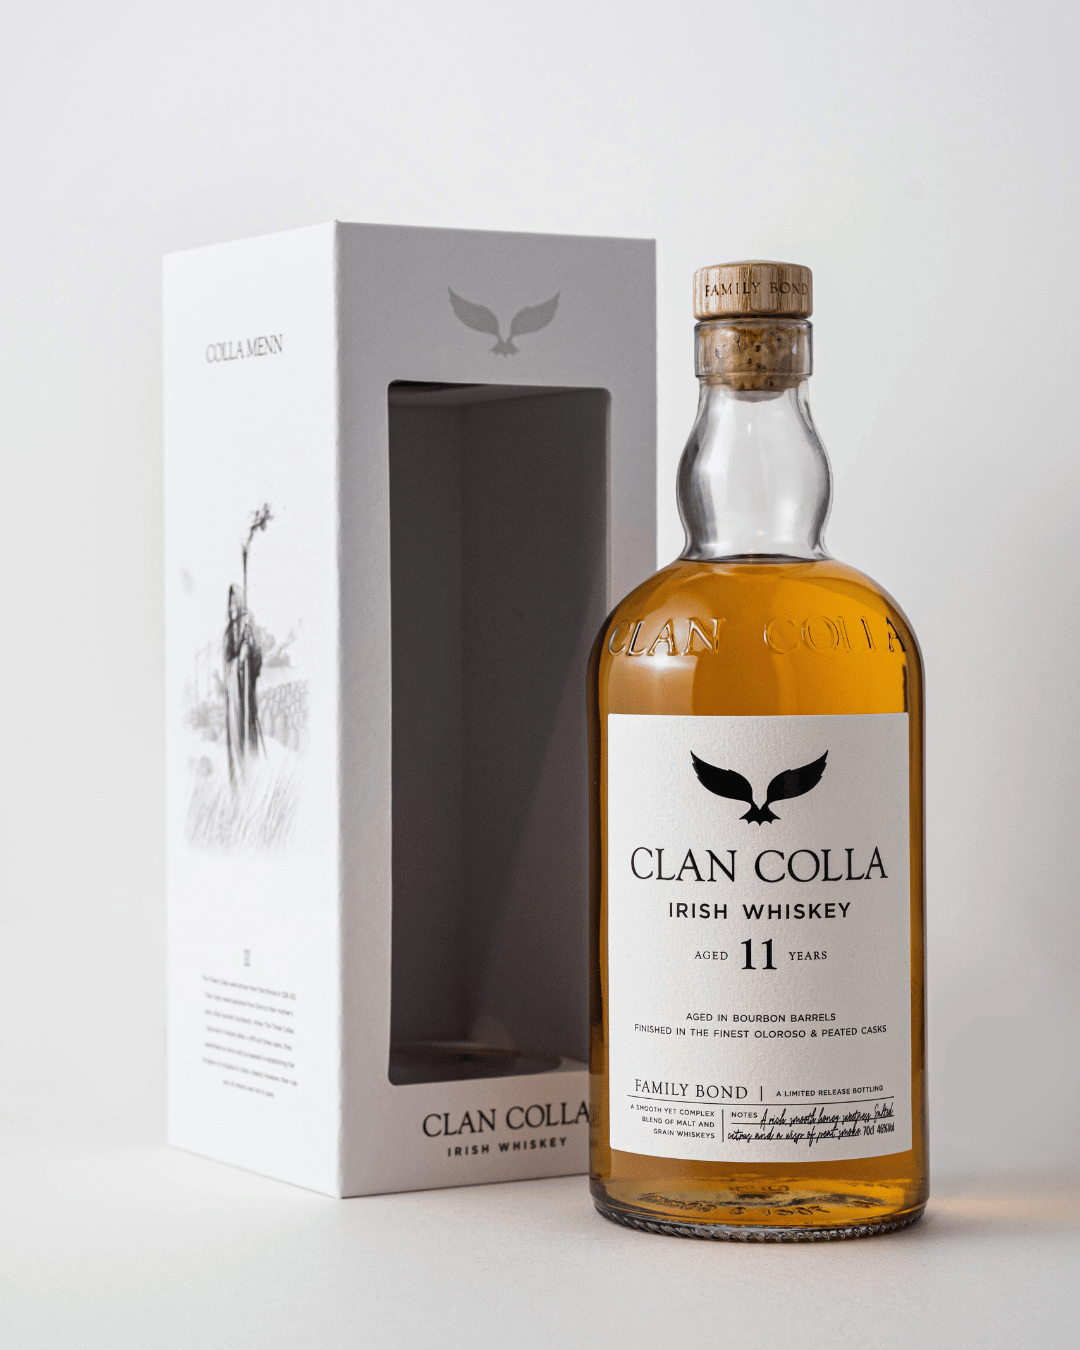 New Packaging for Clan Colla and UAIS